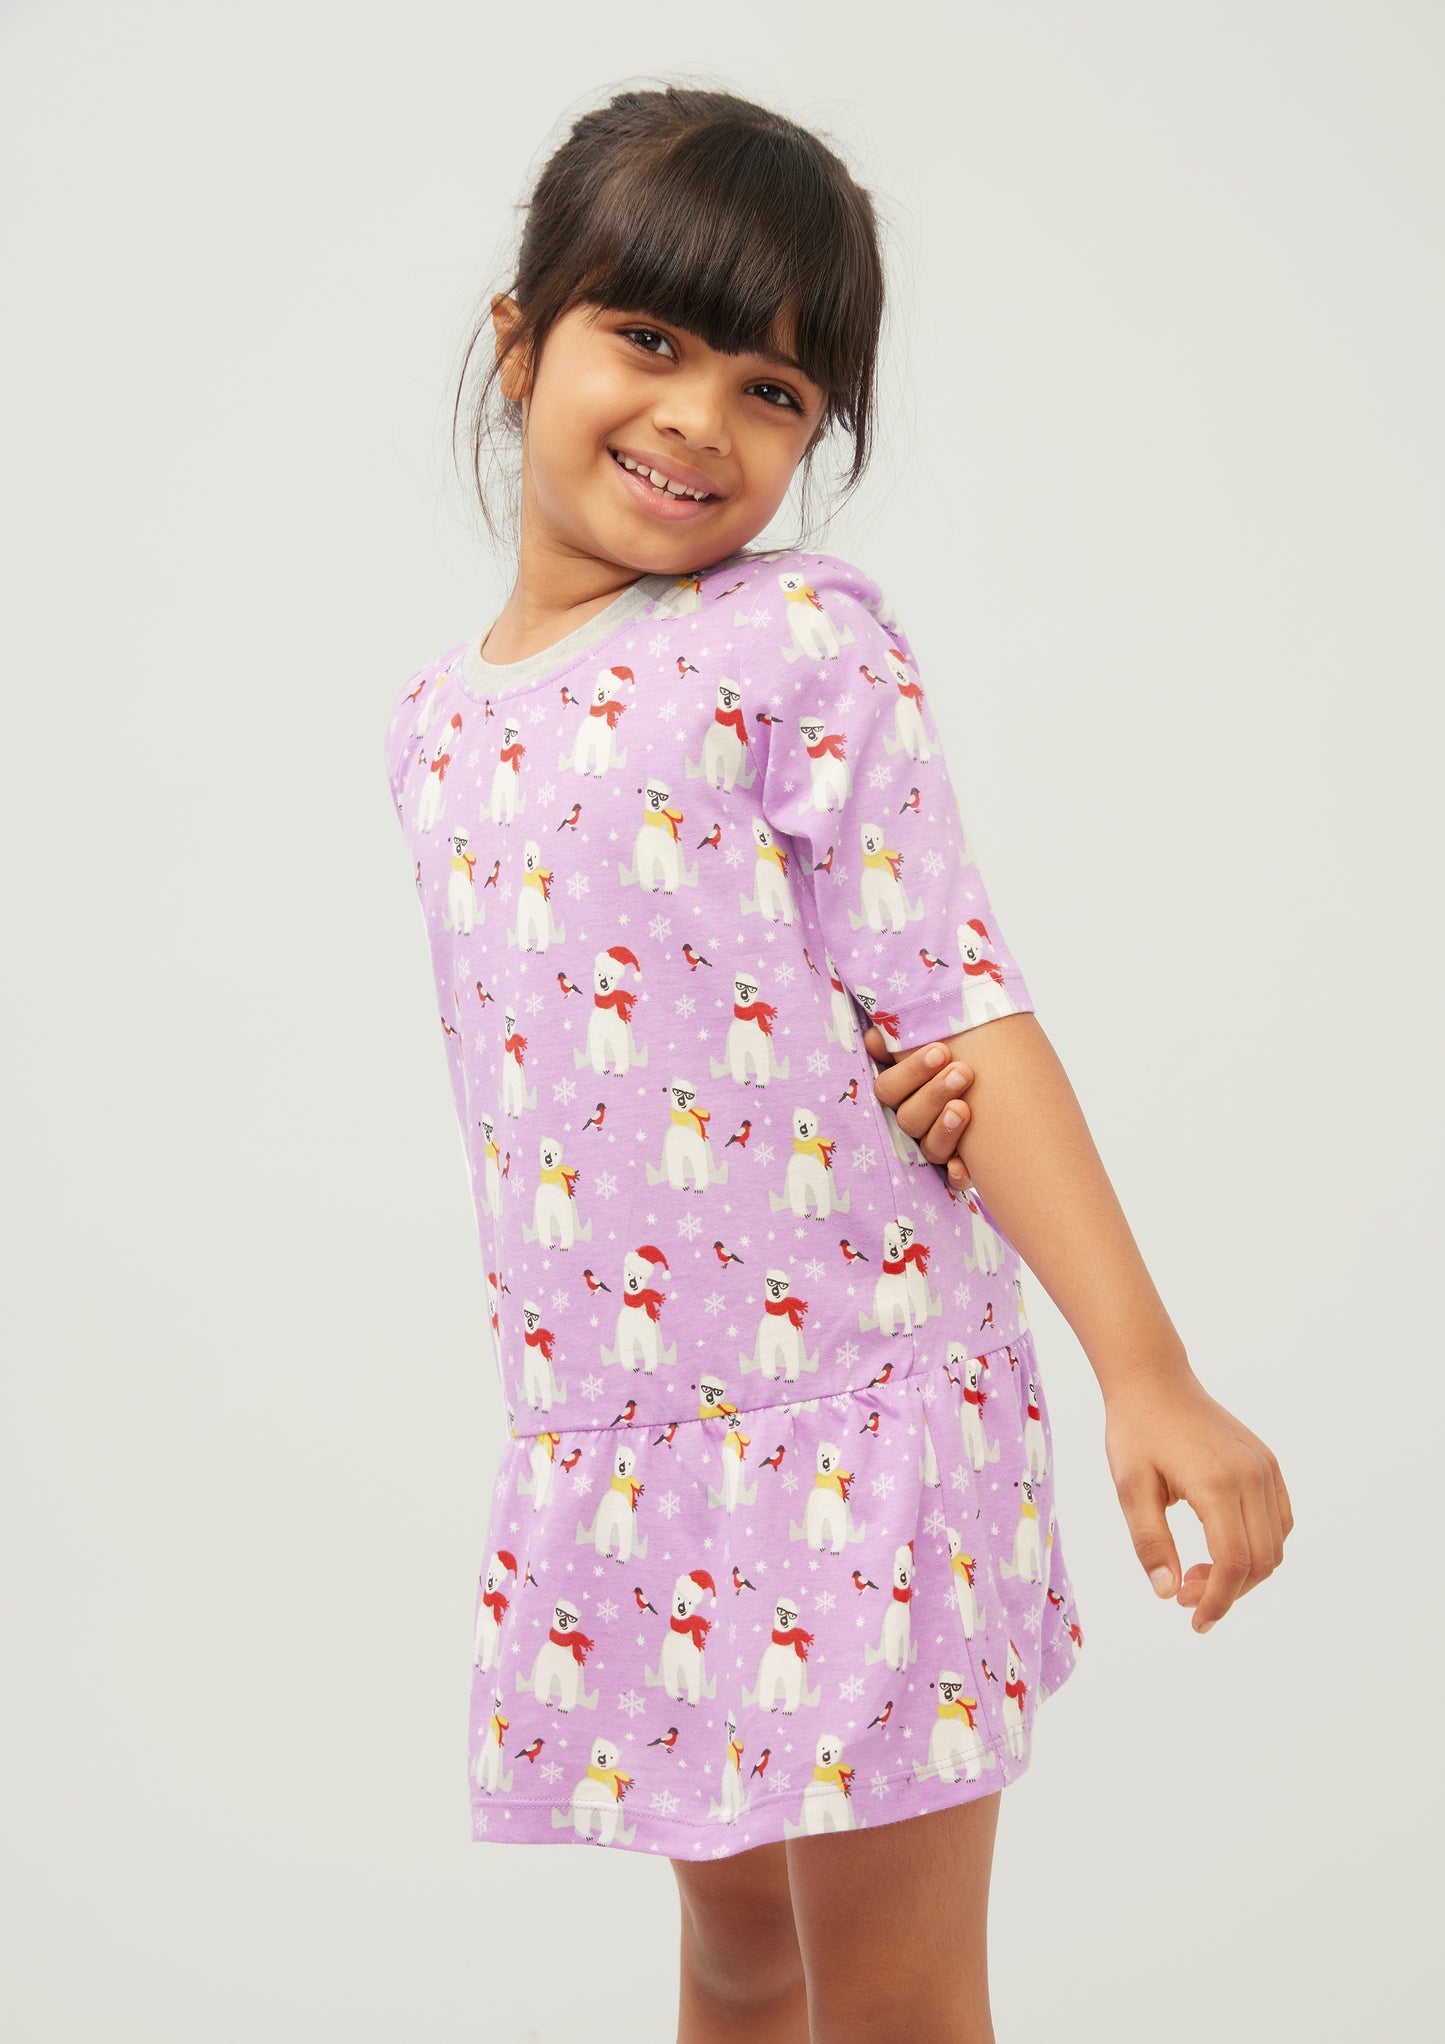 LILAC, WHITE AND RED POLAR BEAR PRINT FIT AND FLARED DRESS